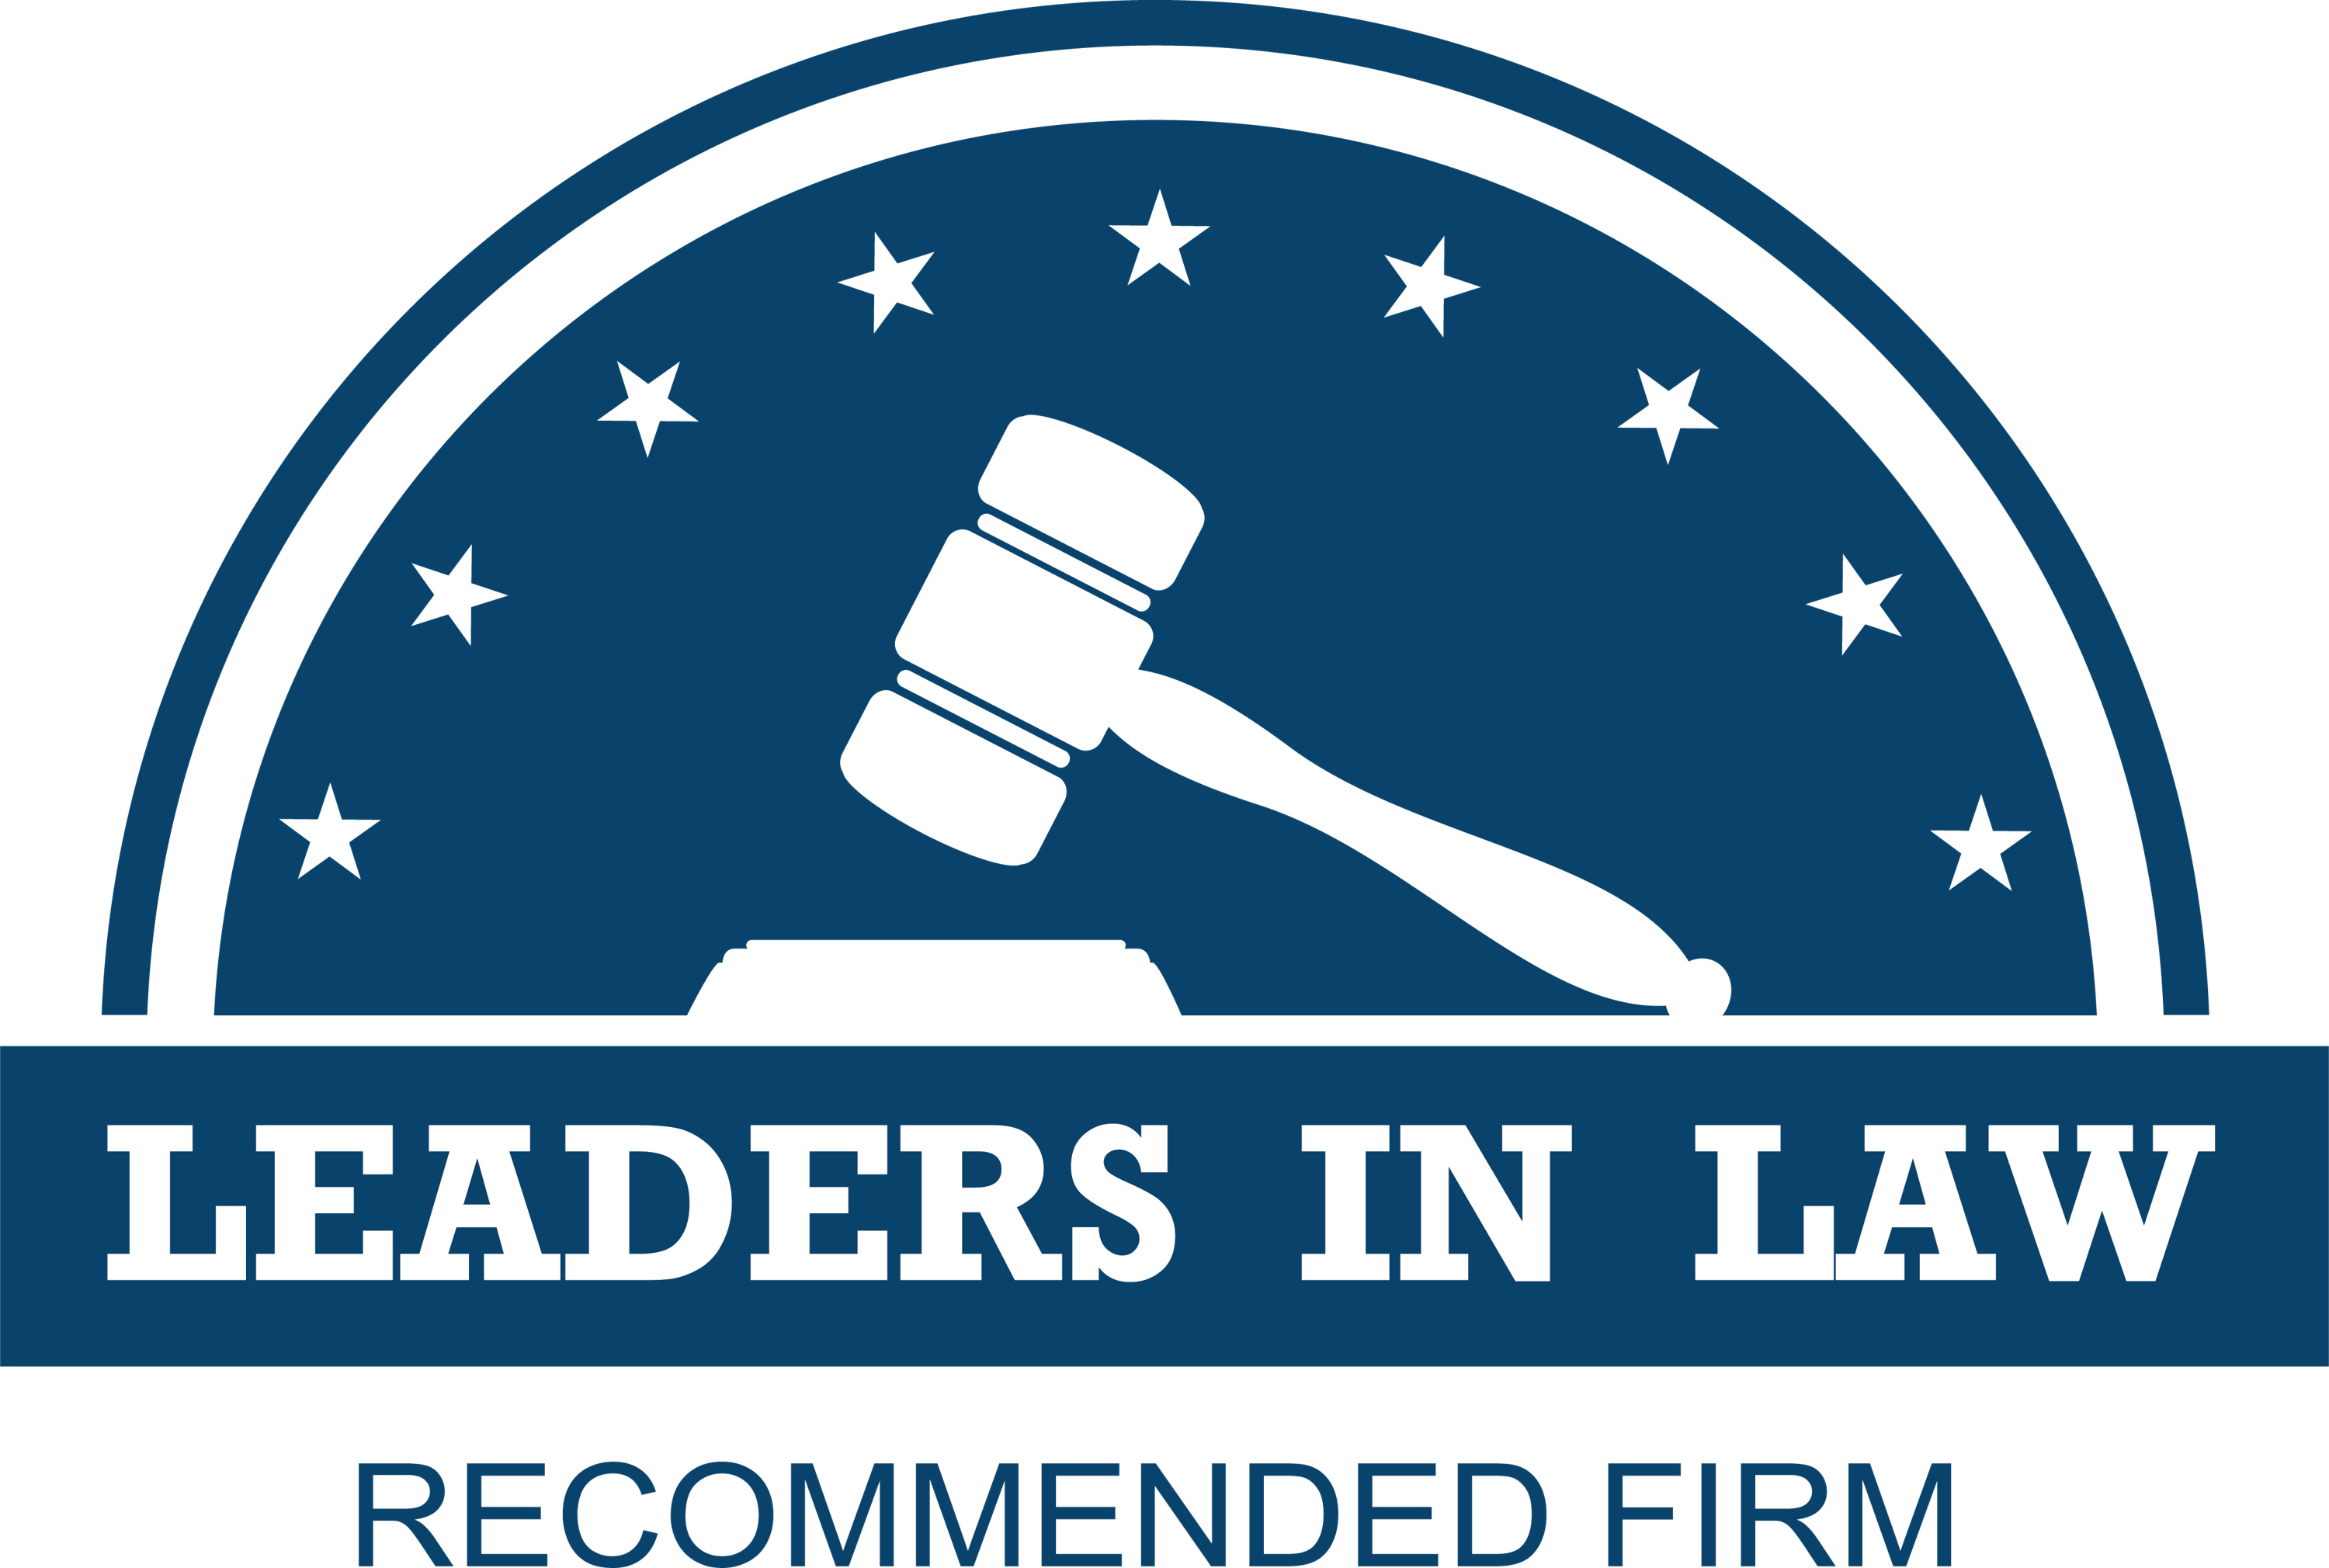 Named as the exclusive "Recommended M&A Firm" and "Recommended M&A Lawyer" in Hong Kong by Leaders in Law, 2022